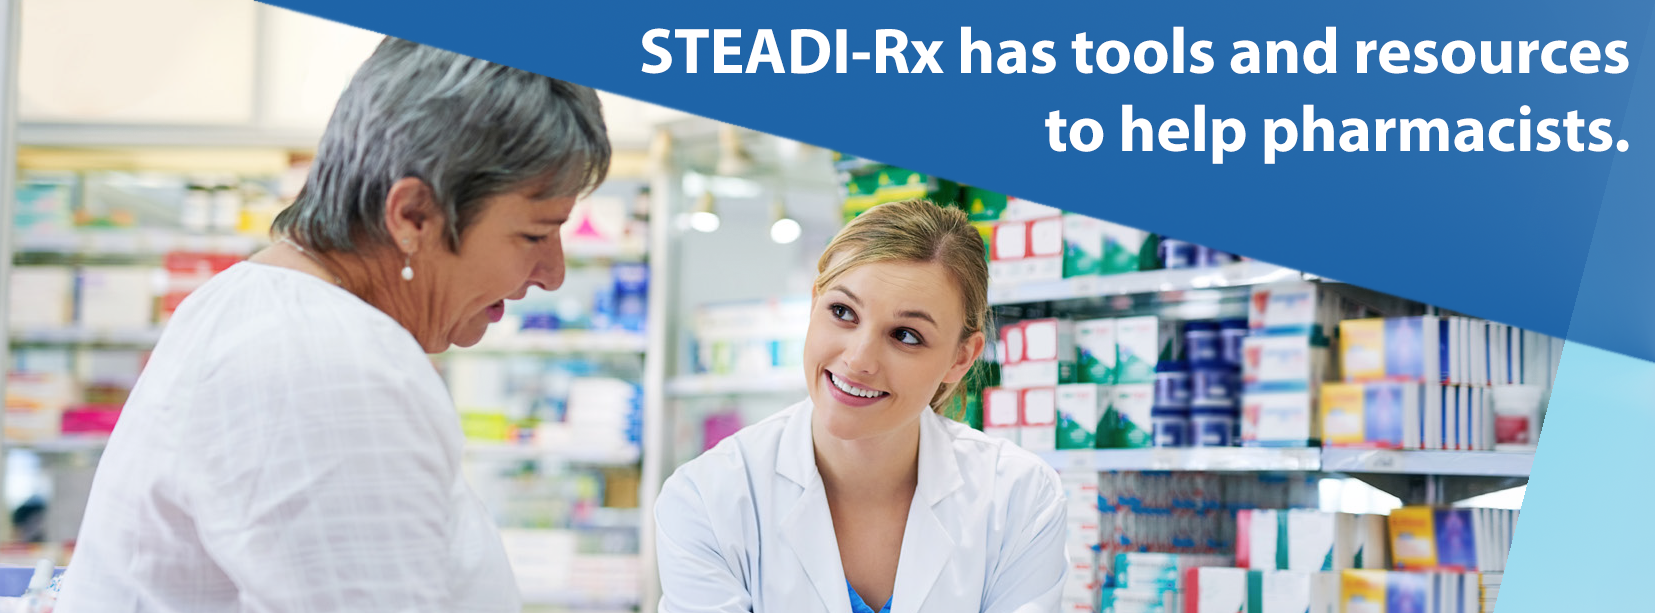 STEADI-Rx has tools and resources to help pharmacists.